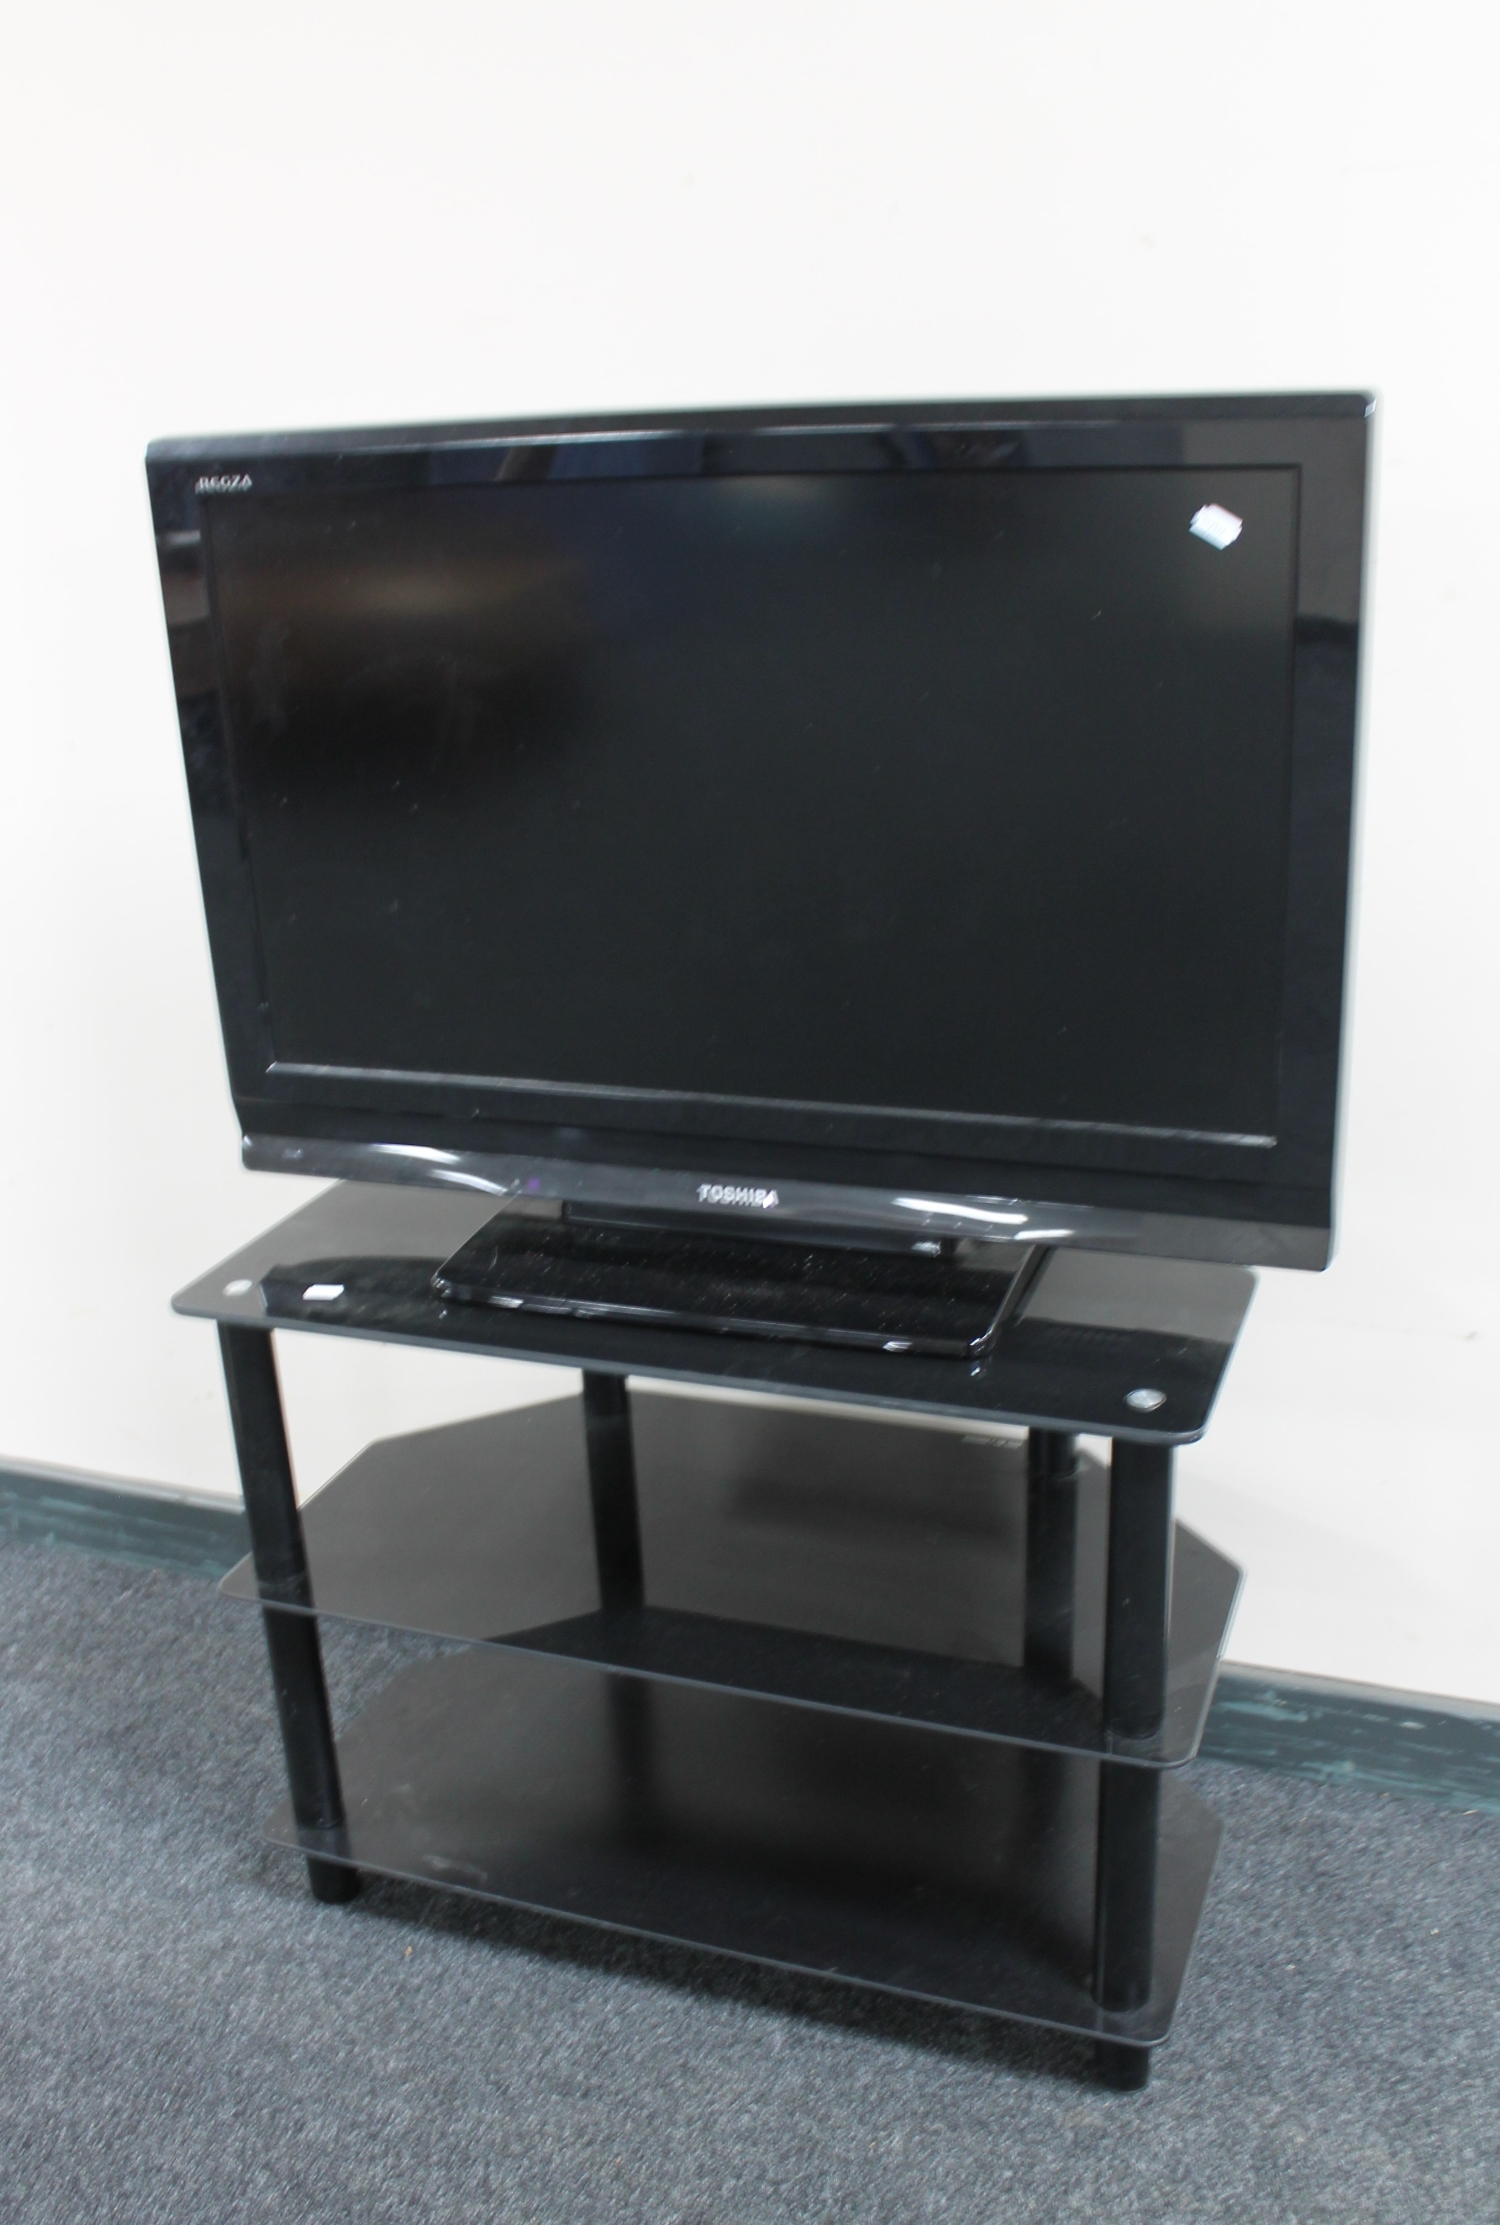 A Toshiba Regza 32" LCD TV with remote on three tier stand